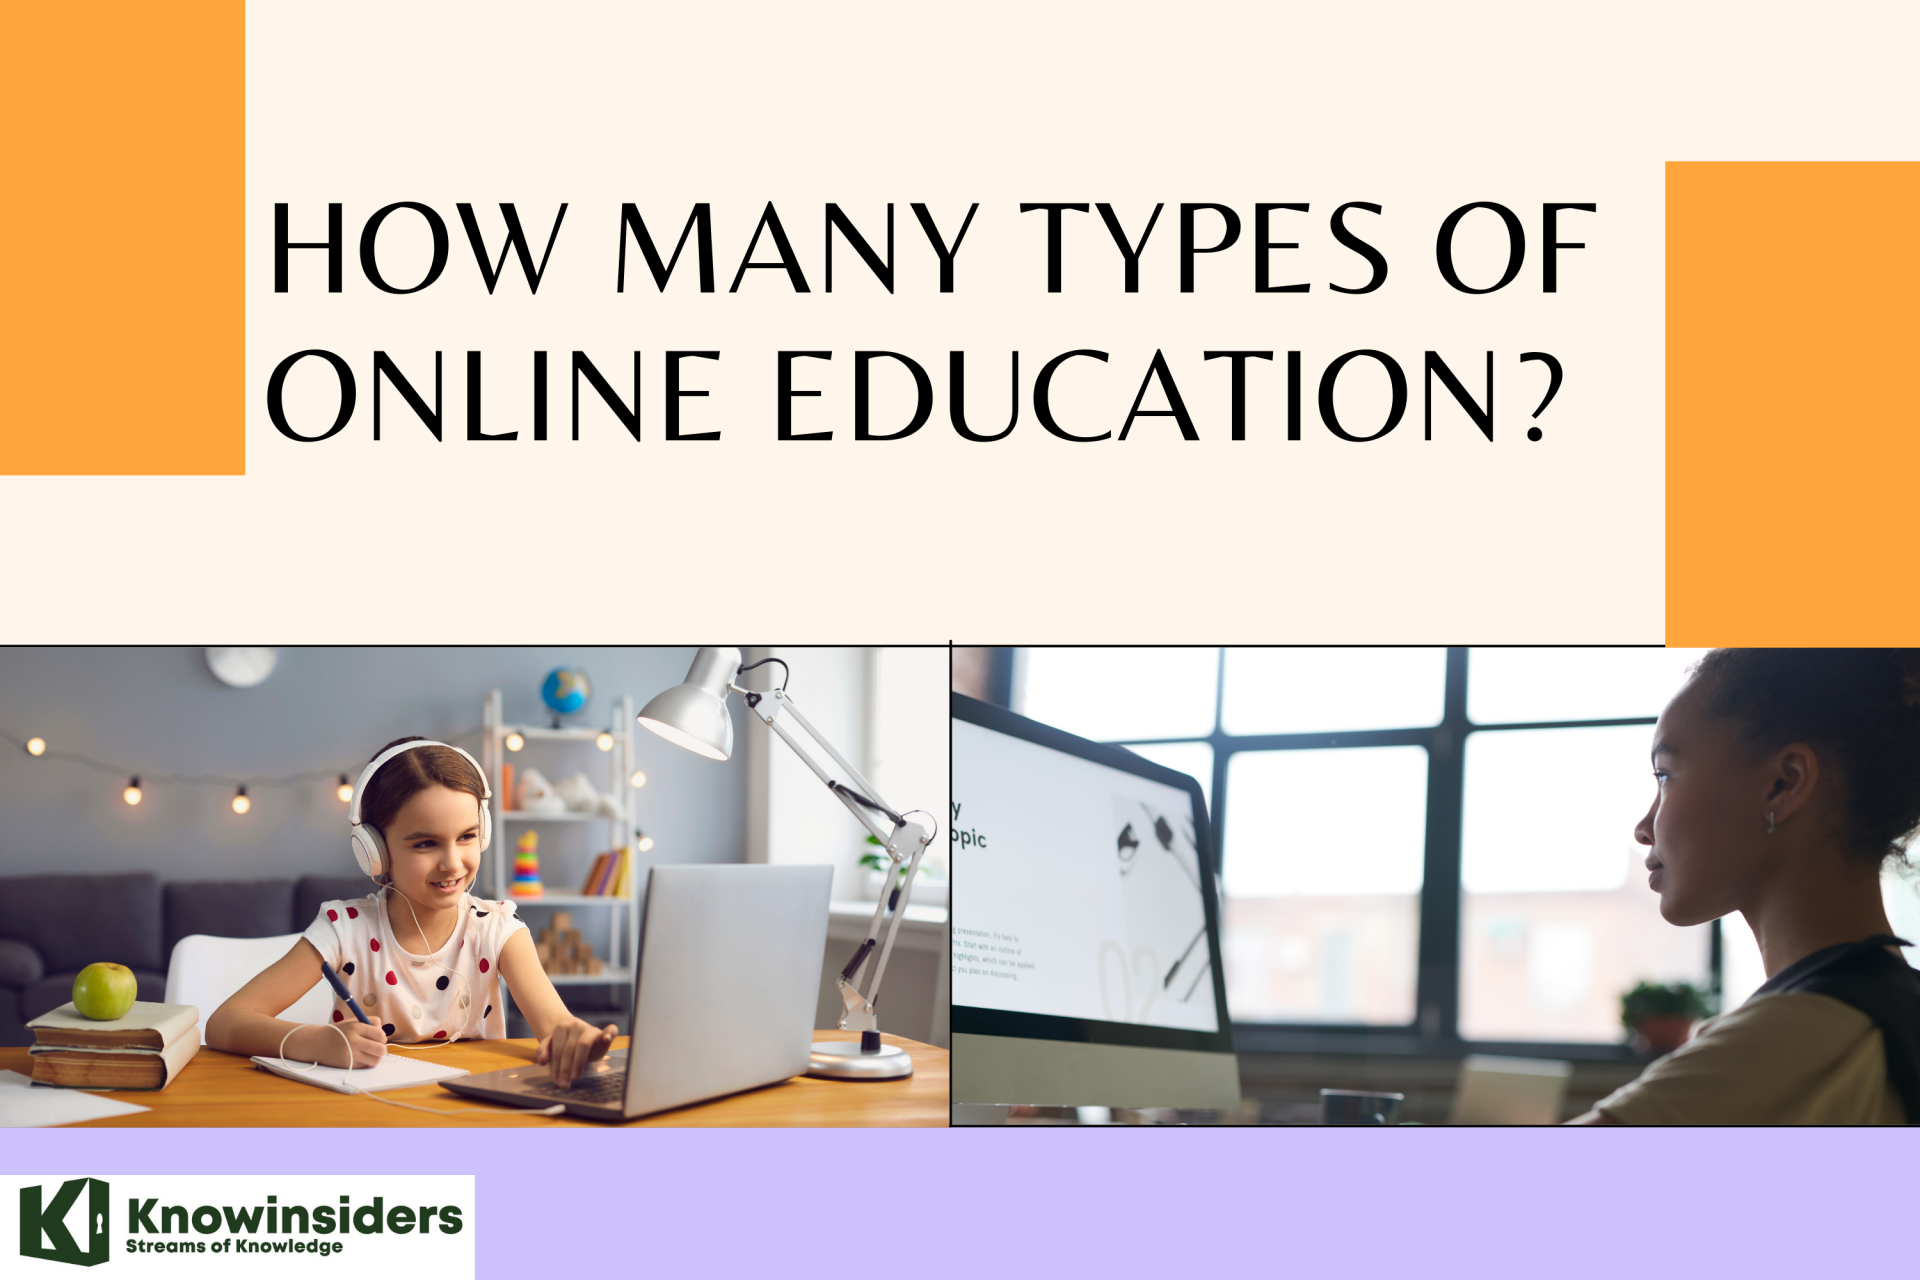 How Many Types of Online Education?